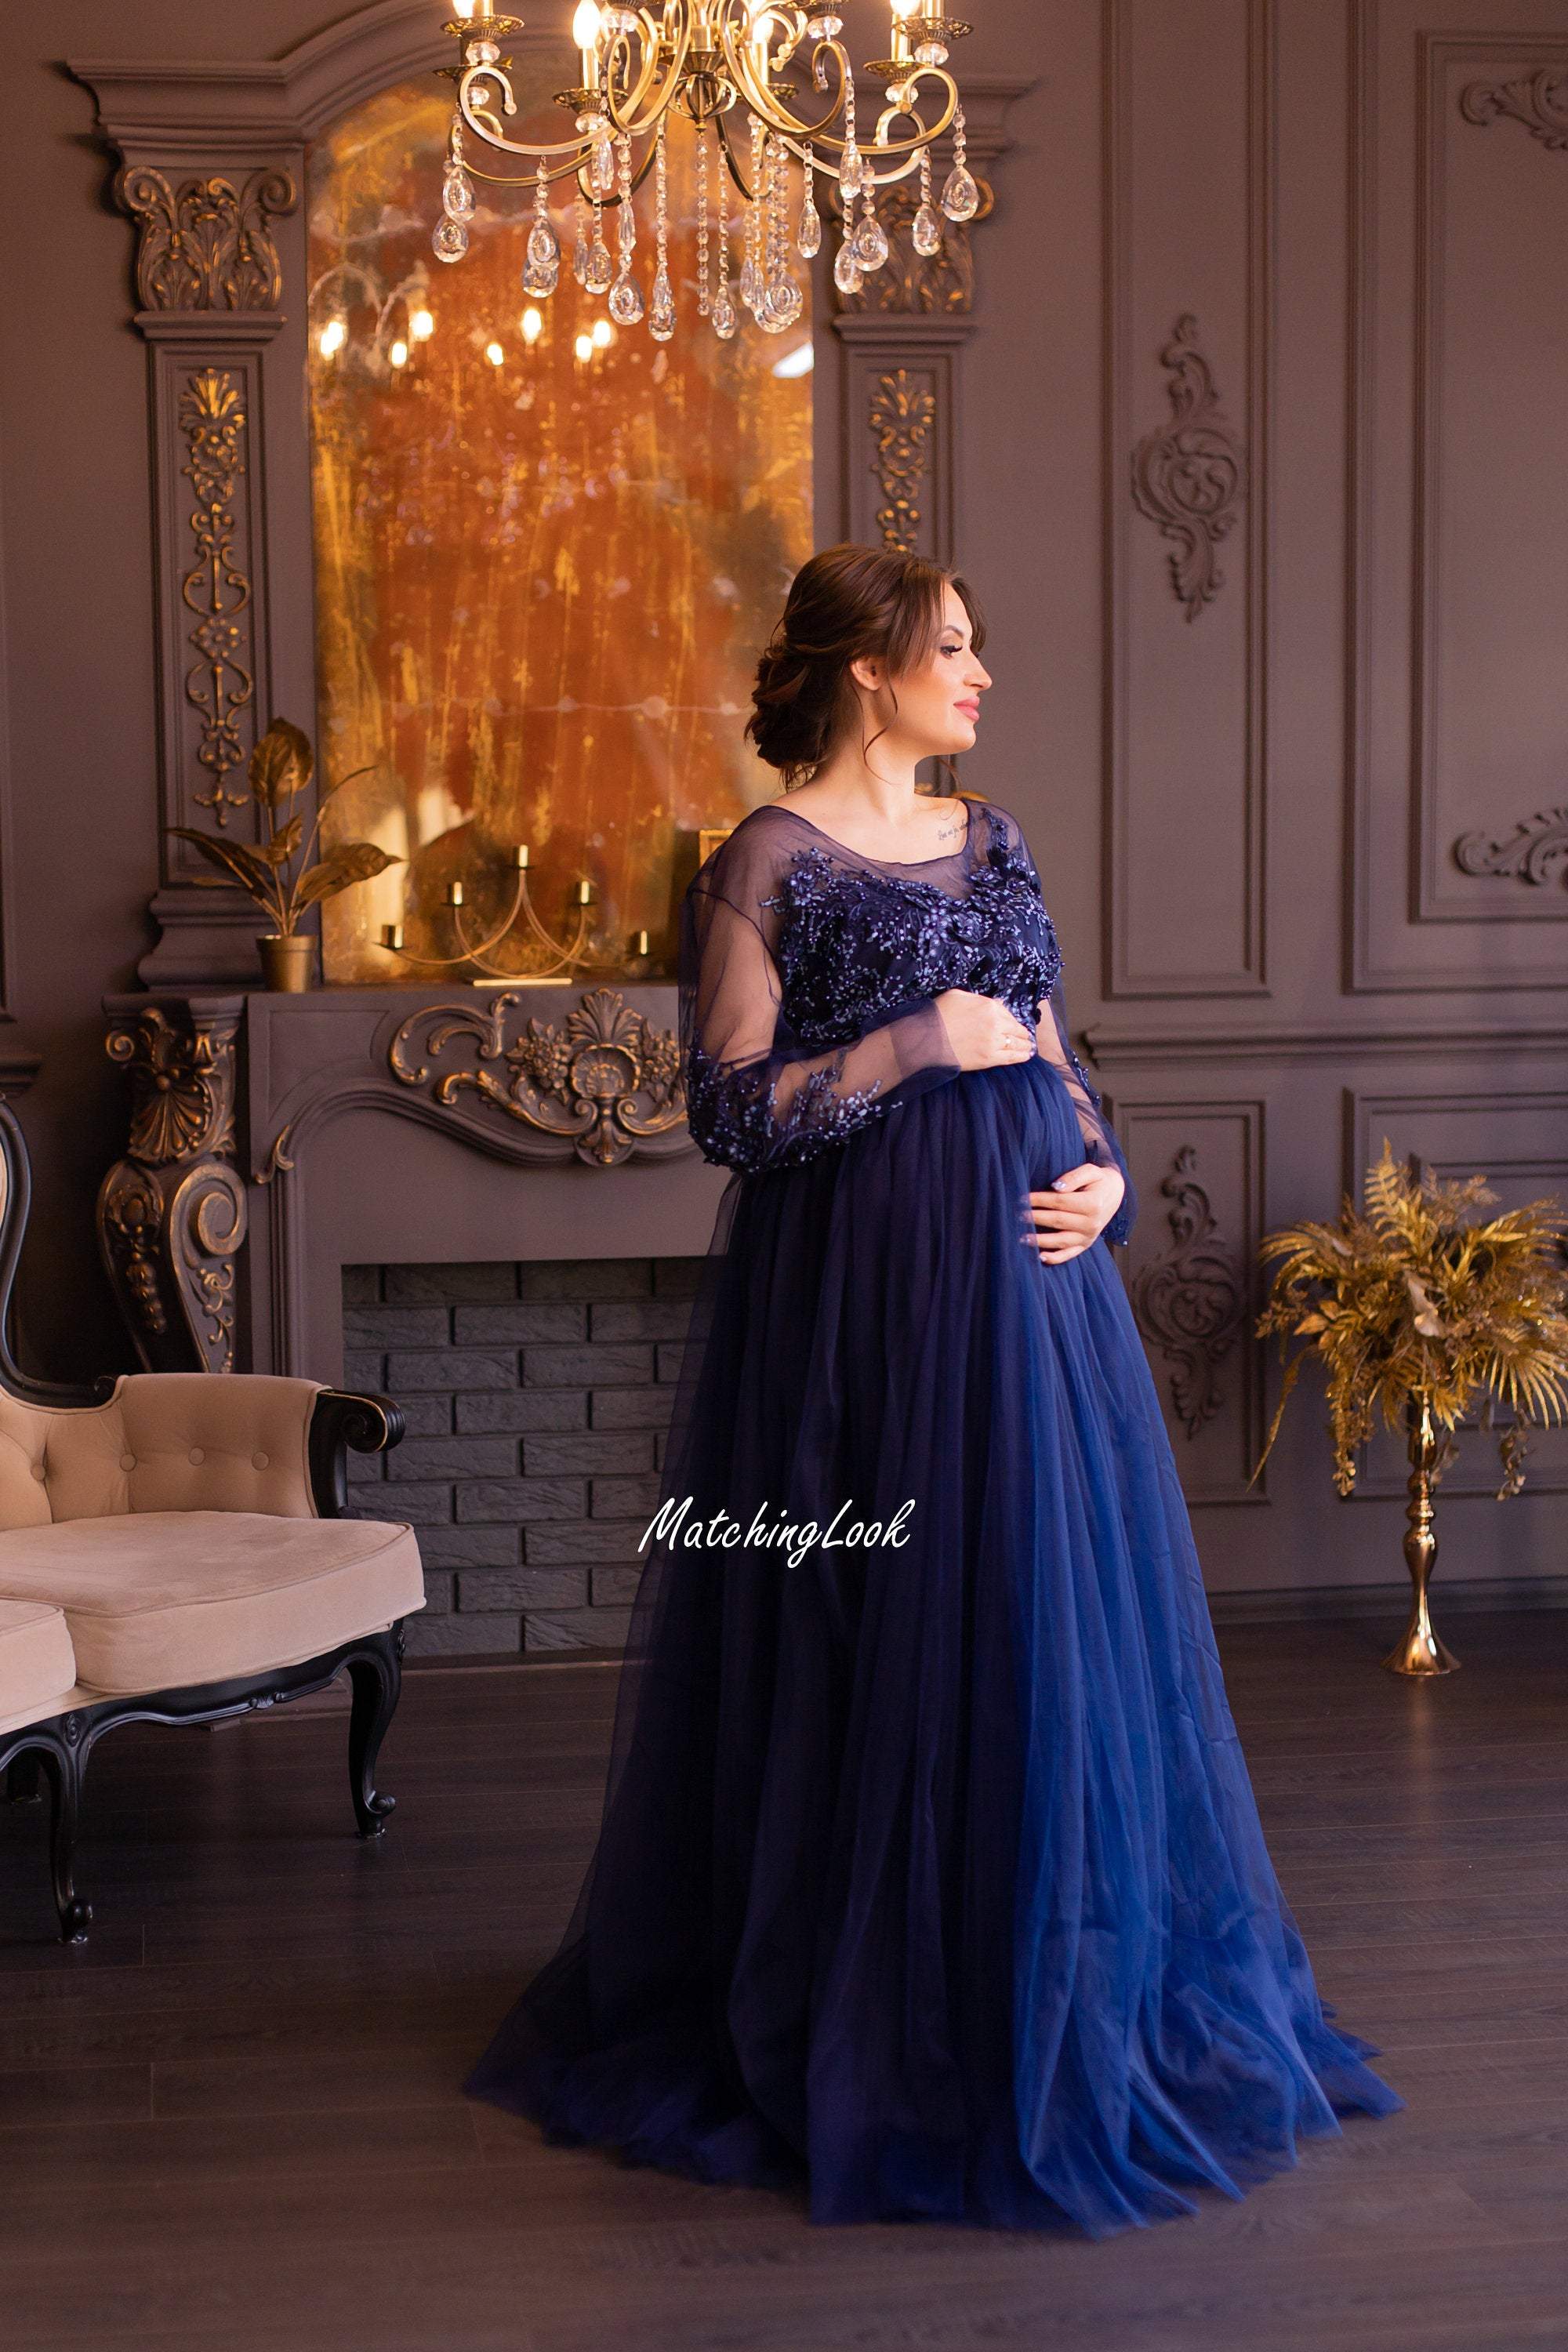 Marianne boho maternity dress - Miss Madison Boutique Maternity, Pregnancy  Gowns, Dresses for Photography, Photoshoot, Bridesmaid, Babyshower